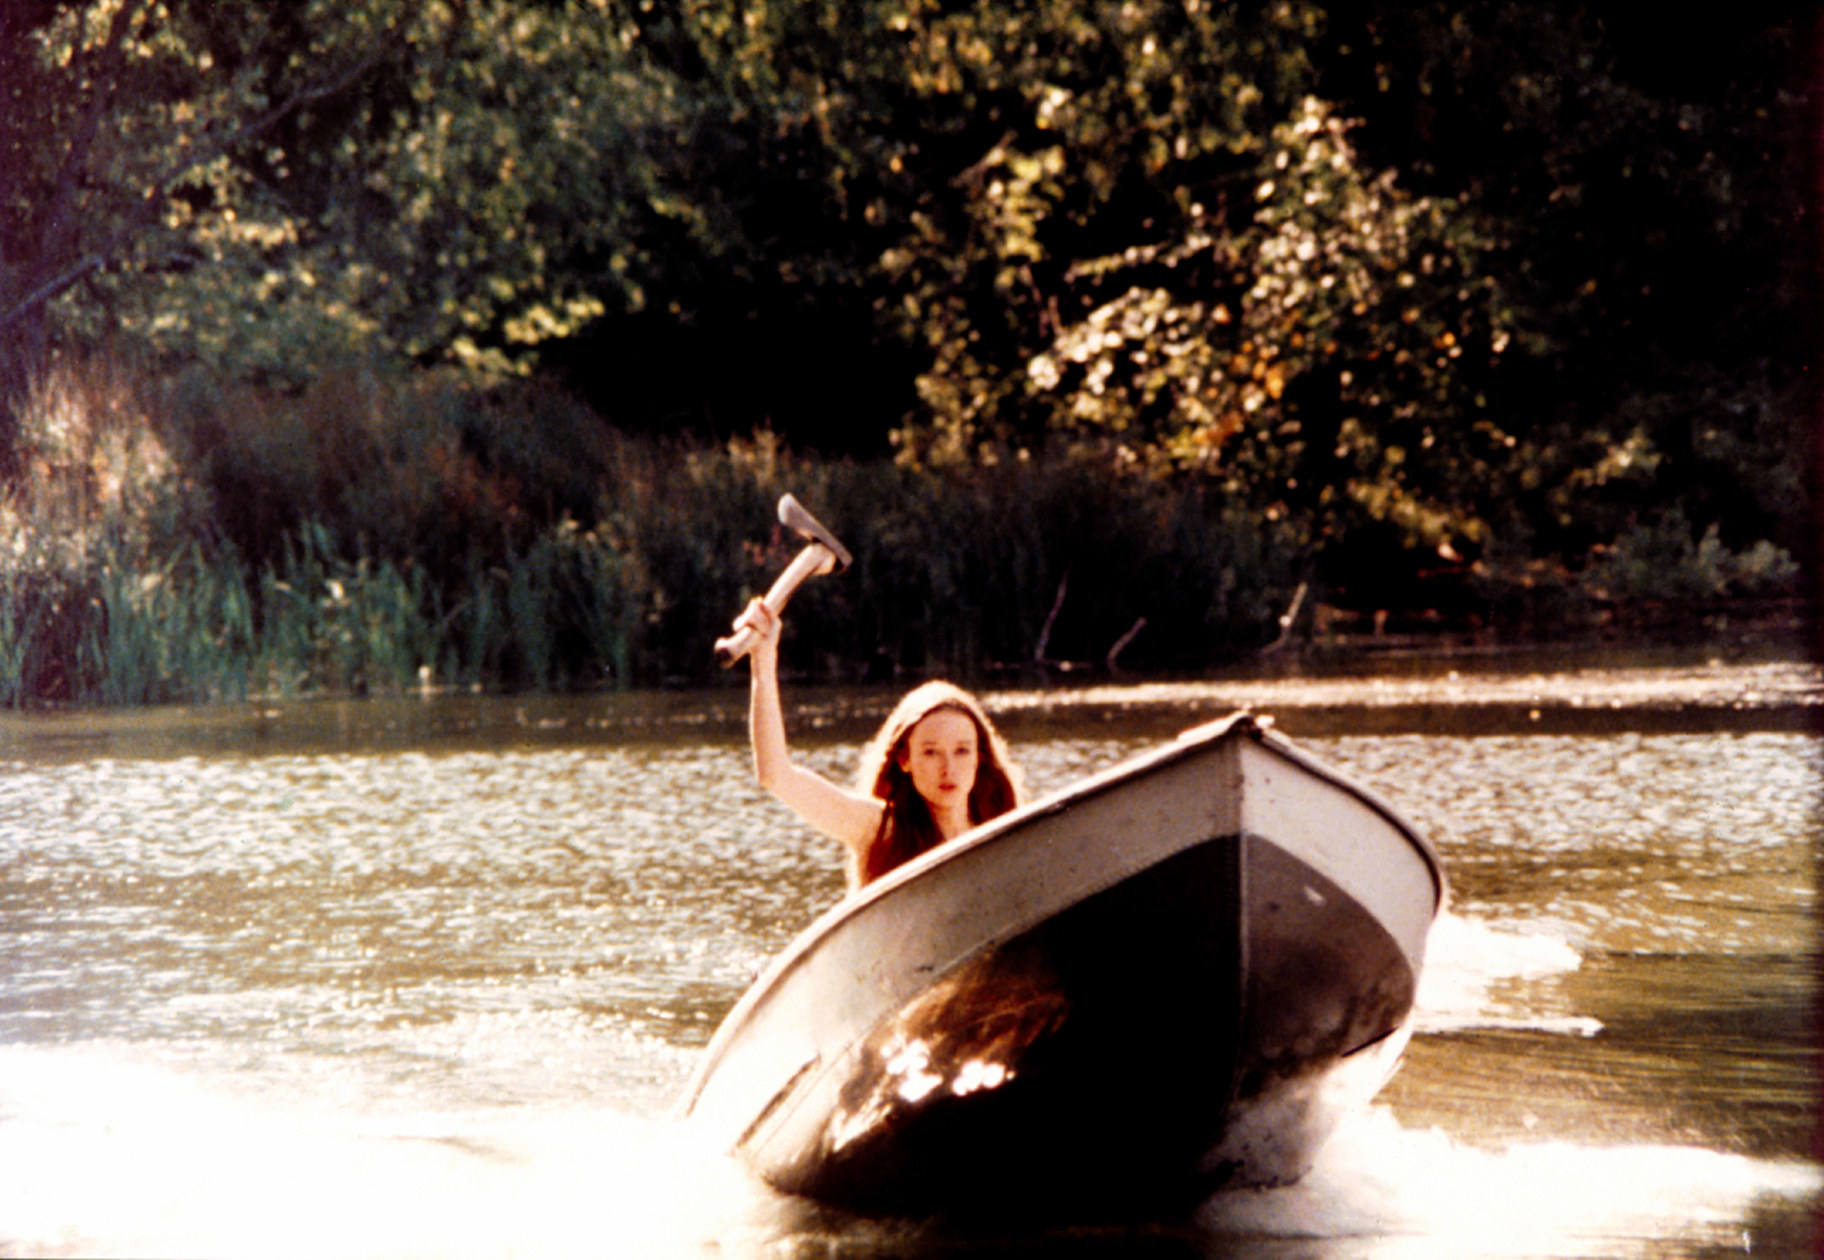 A woman holding an axe on a boat